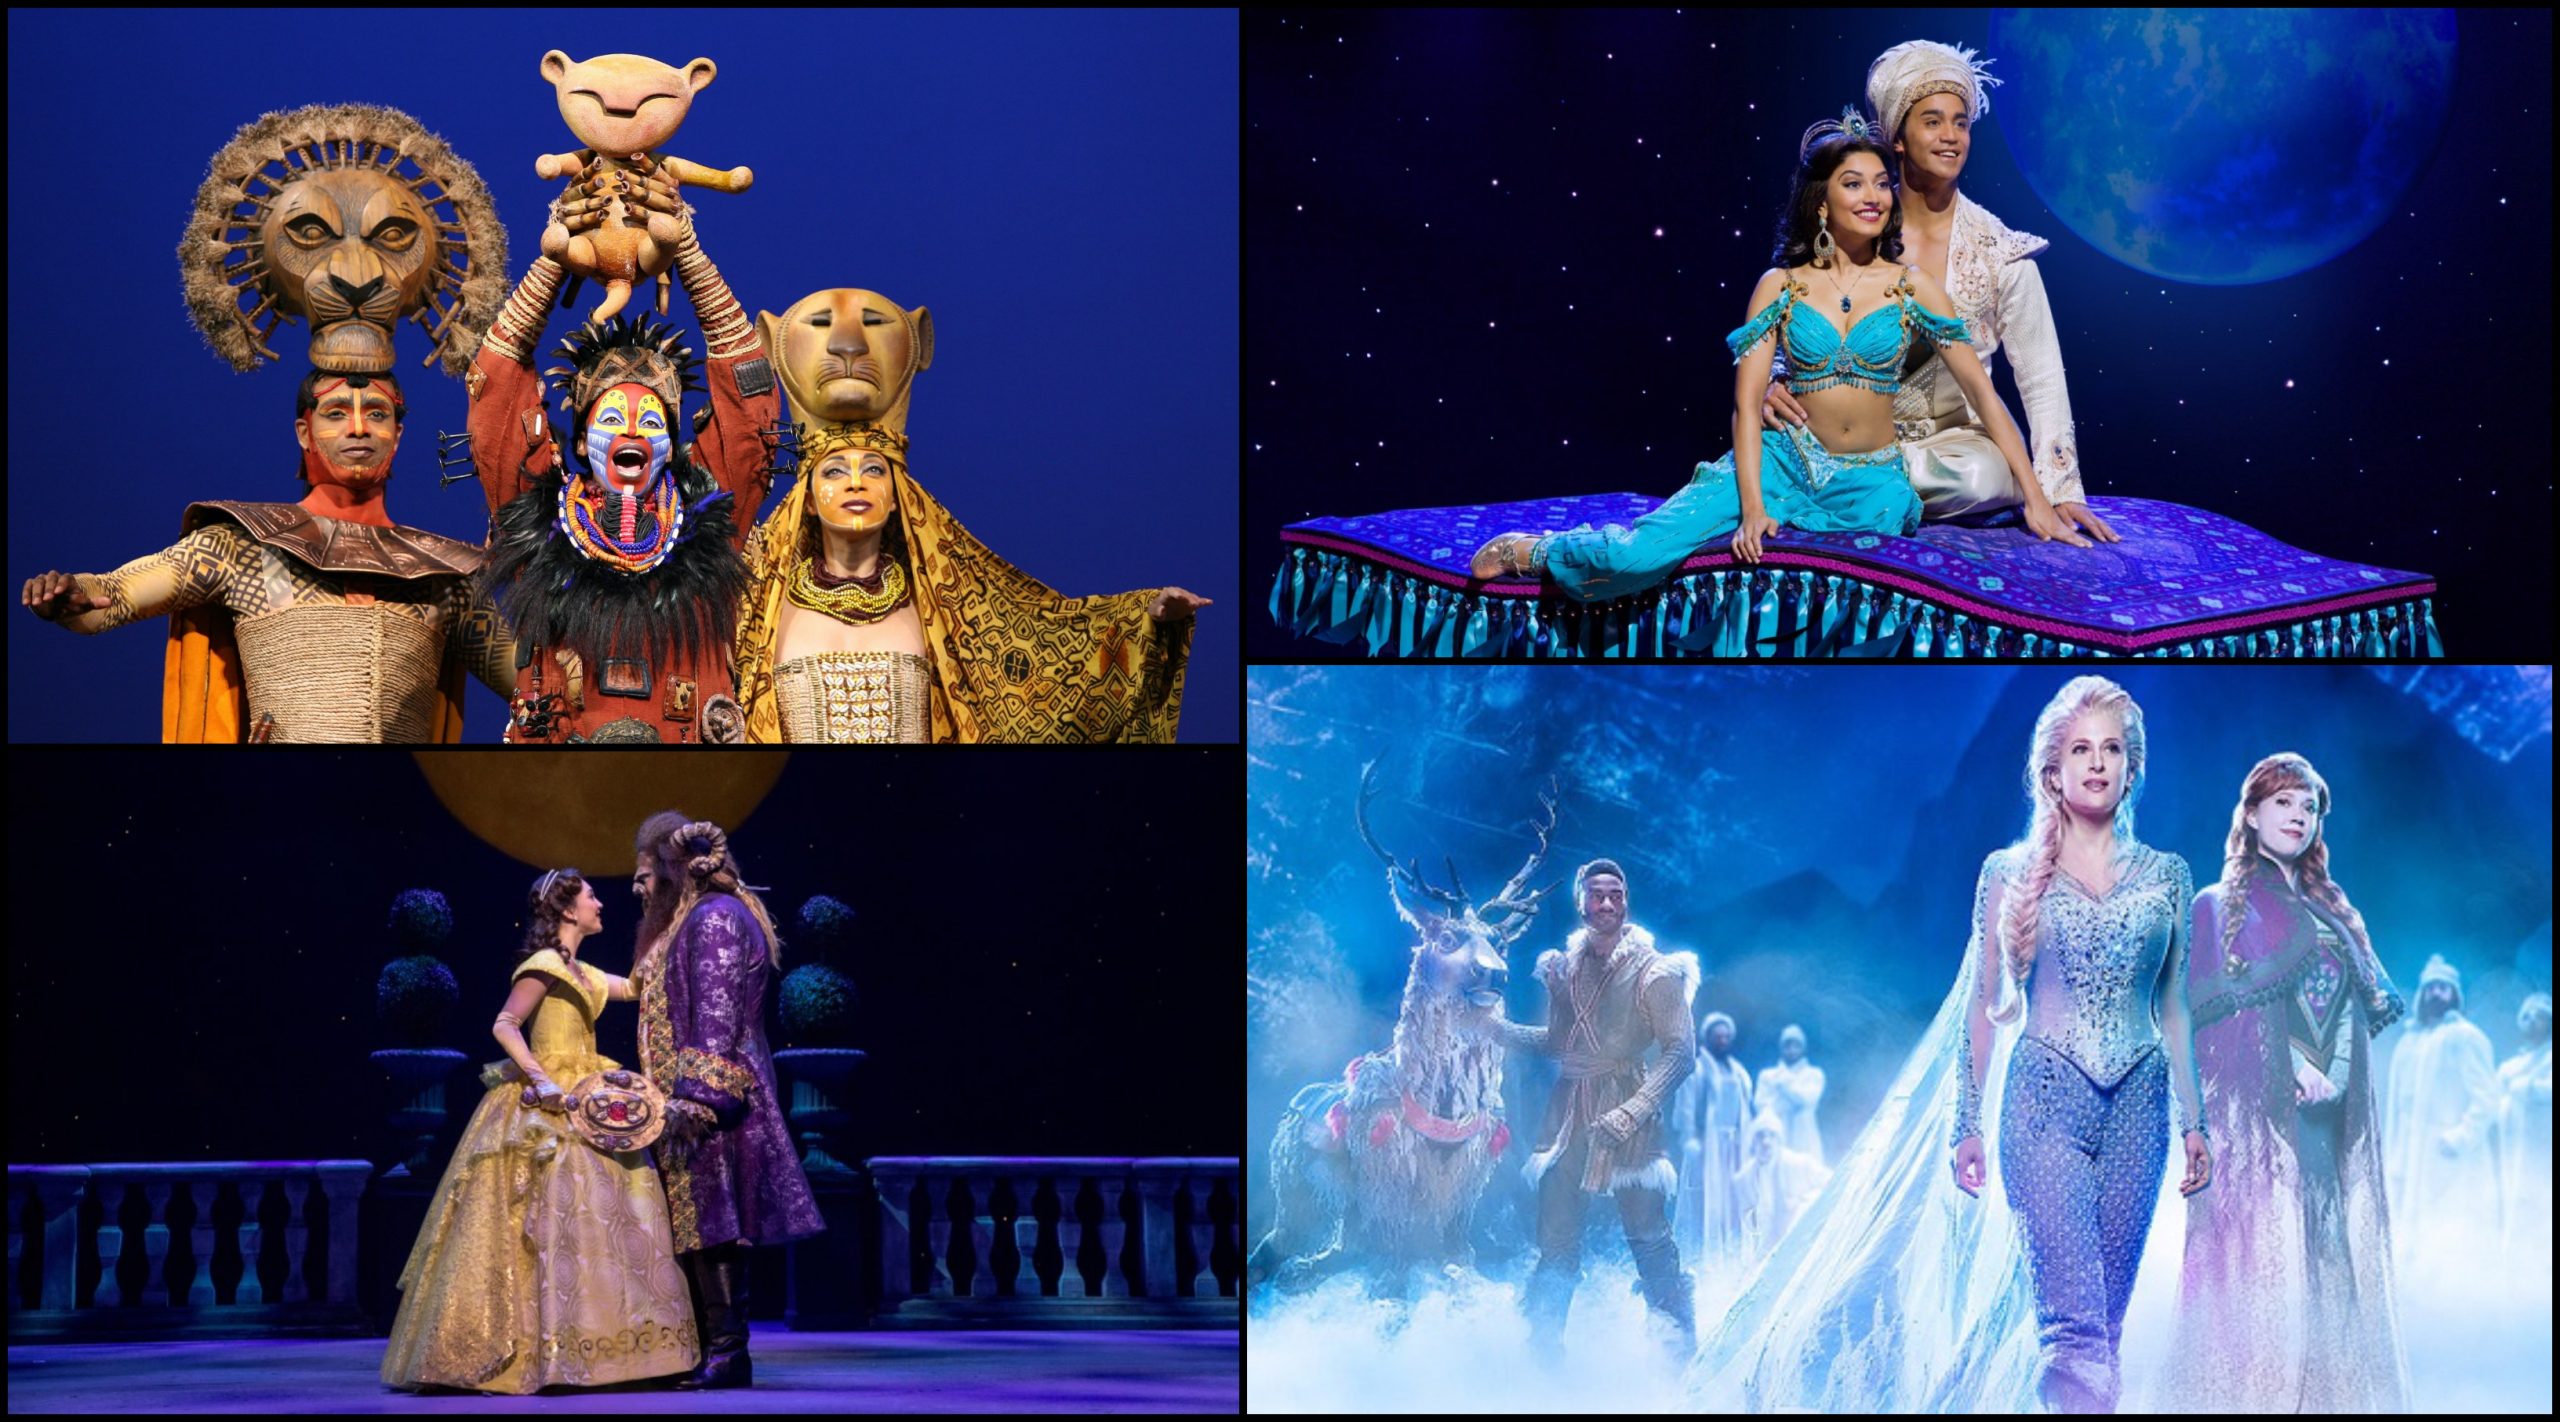 Broadway Cares To Host Disney Benefit Concert via Live Stream for COVID-19 Relief Fund